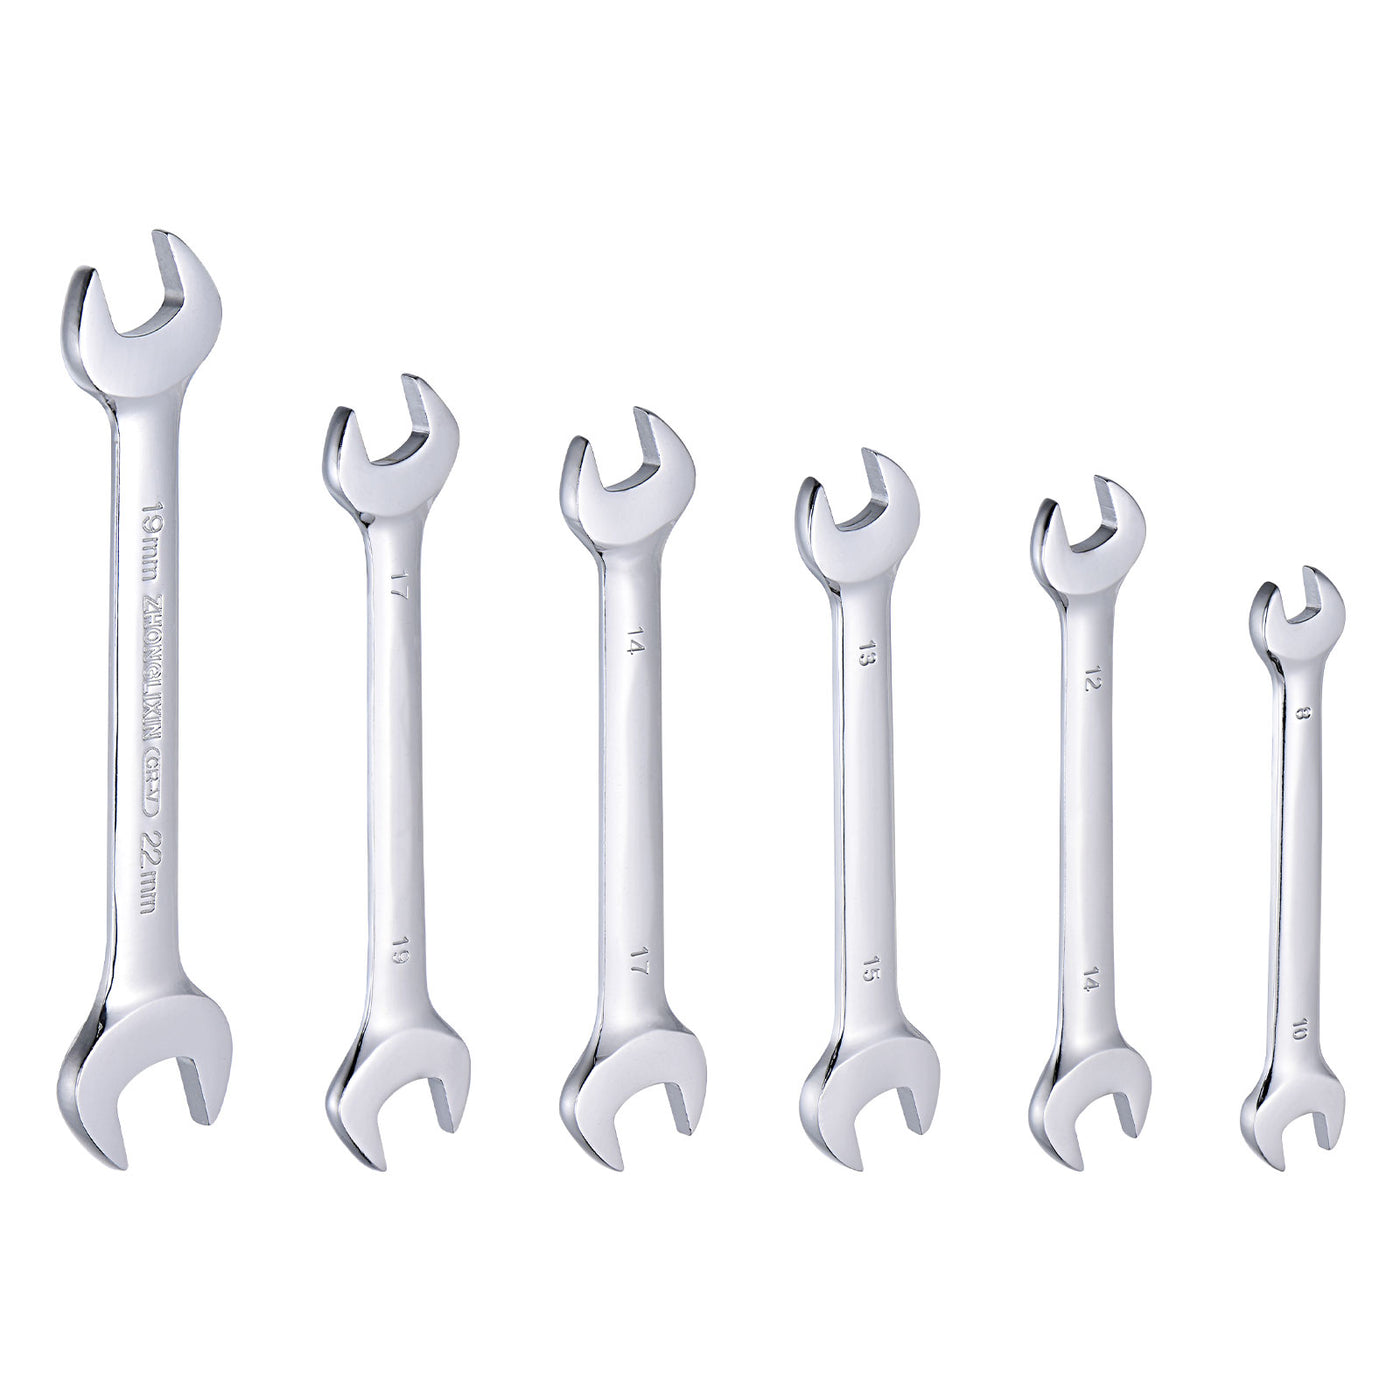 uxcell Uxcell Double Open-End Wrench Set, 8-22mm Metric CR-V with Rolling Pouch, 6-Piece